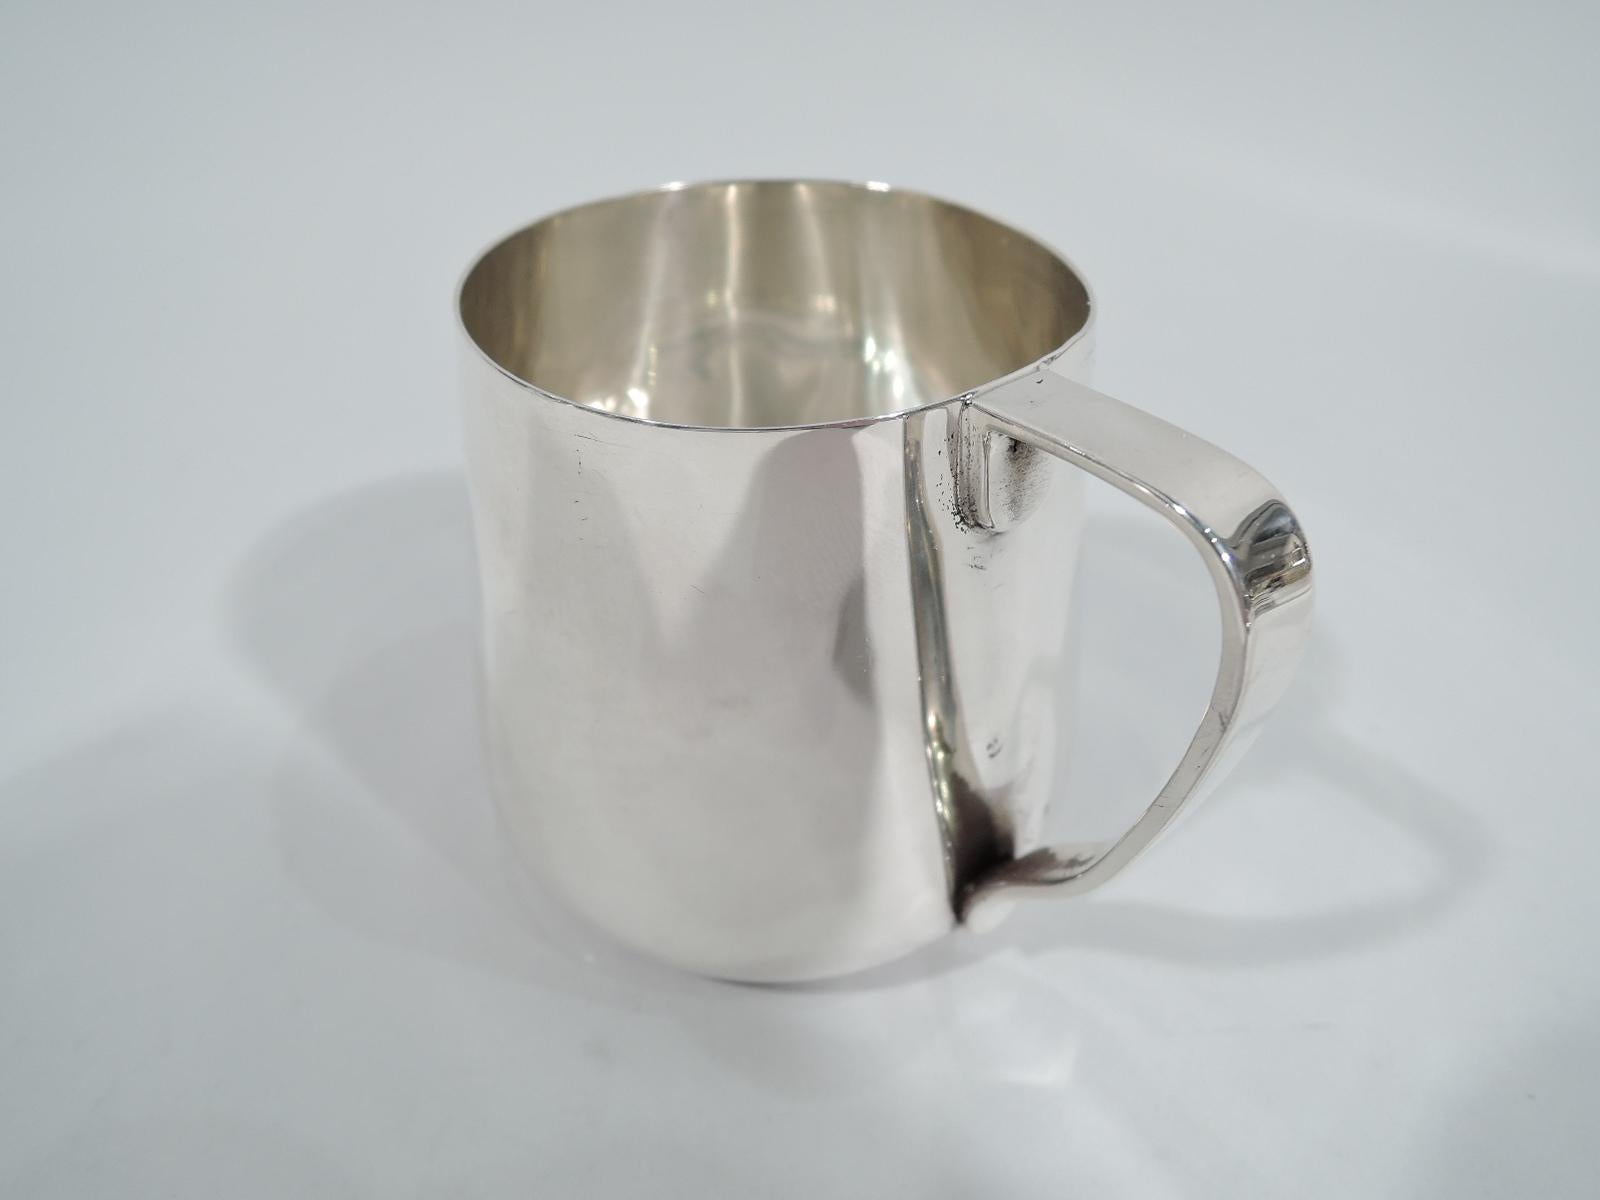 American Modern sterling silver baby cup. Made by Tiffany & Co. in New York. Upward tapering sides and scroll bracket handle. Lots of room for engraving. Fully marked including pattern no. 20272. Weight: 2.8 troy ounces.